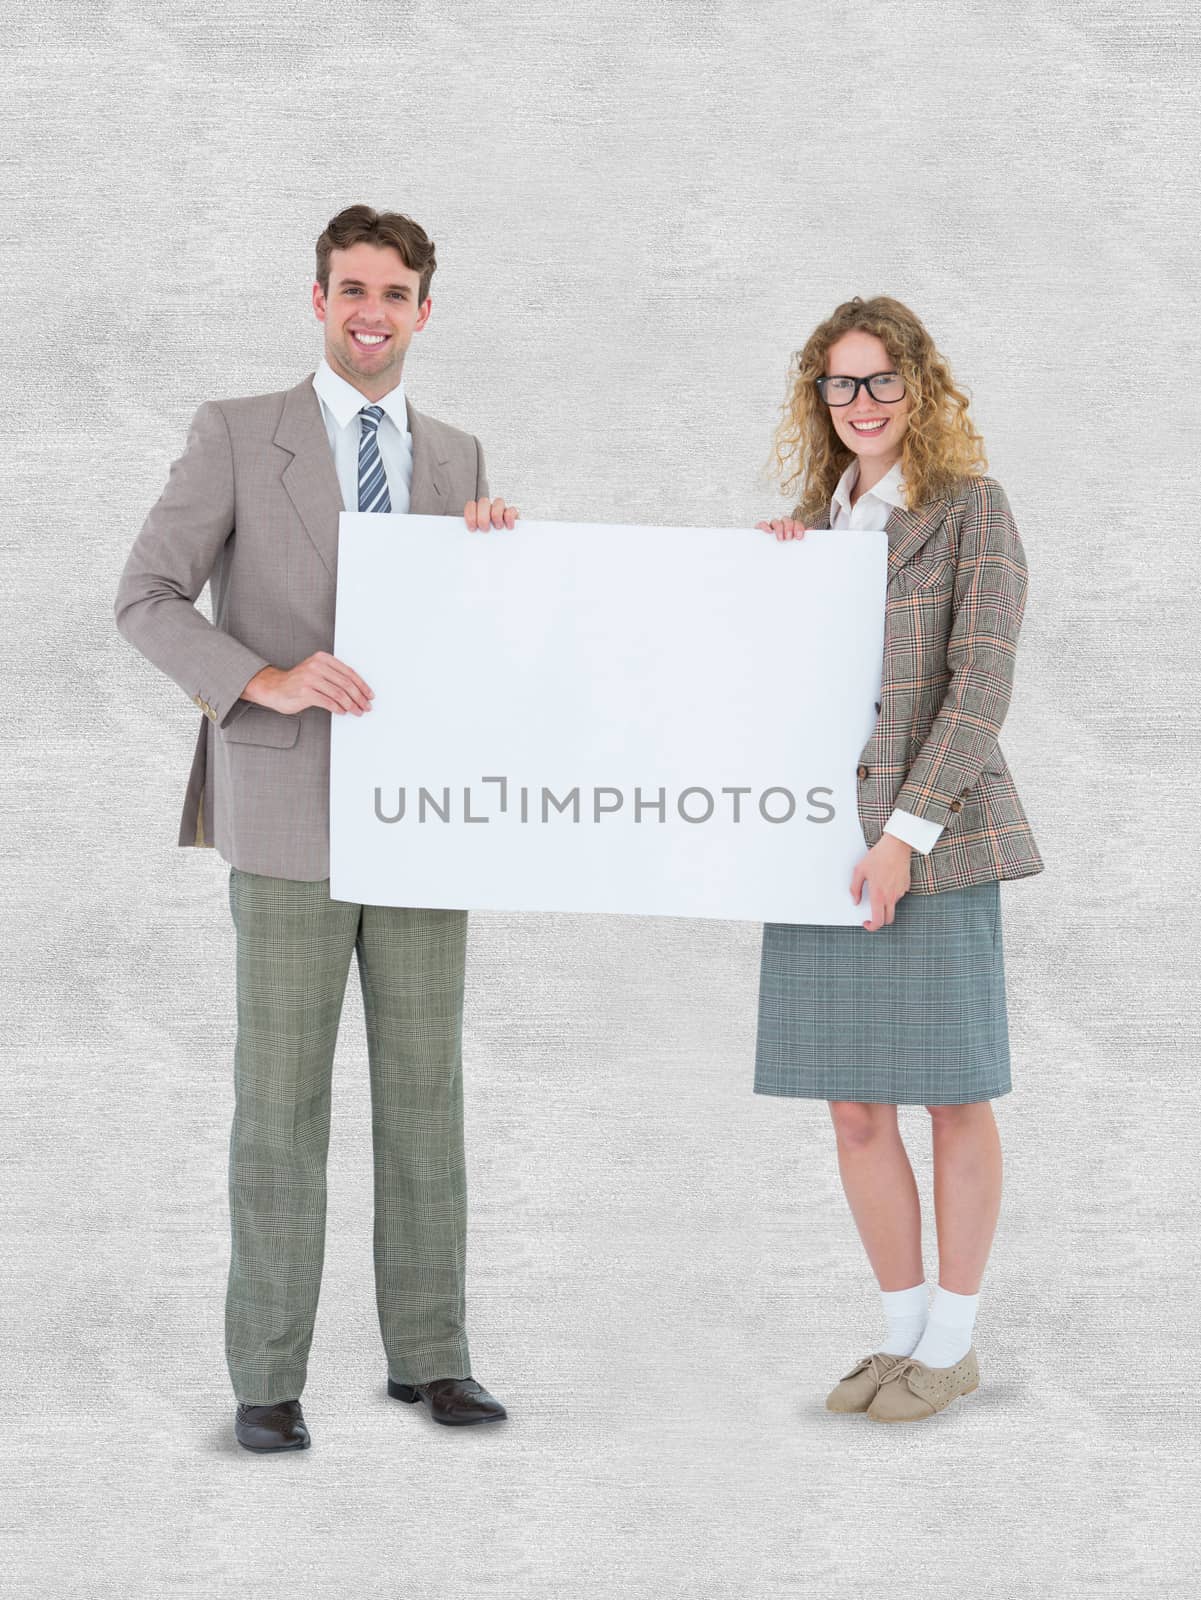 Hipster couple holding poster smiling at camera against white background